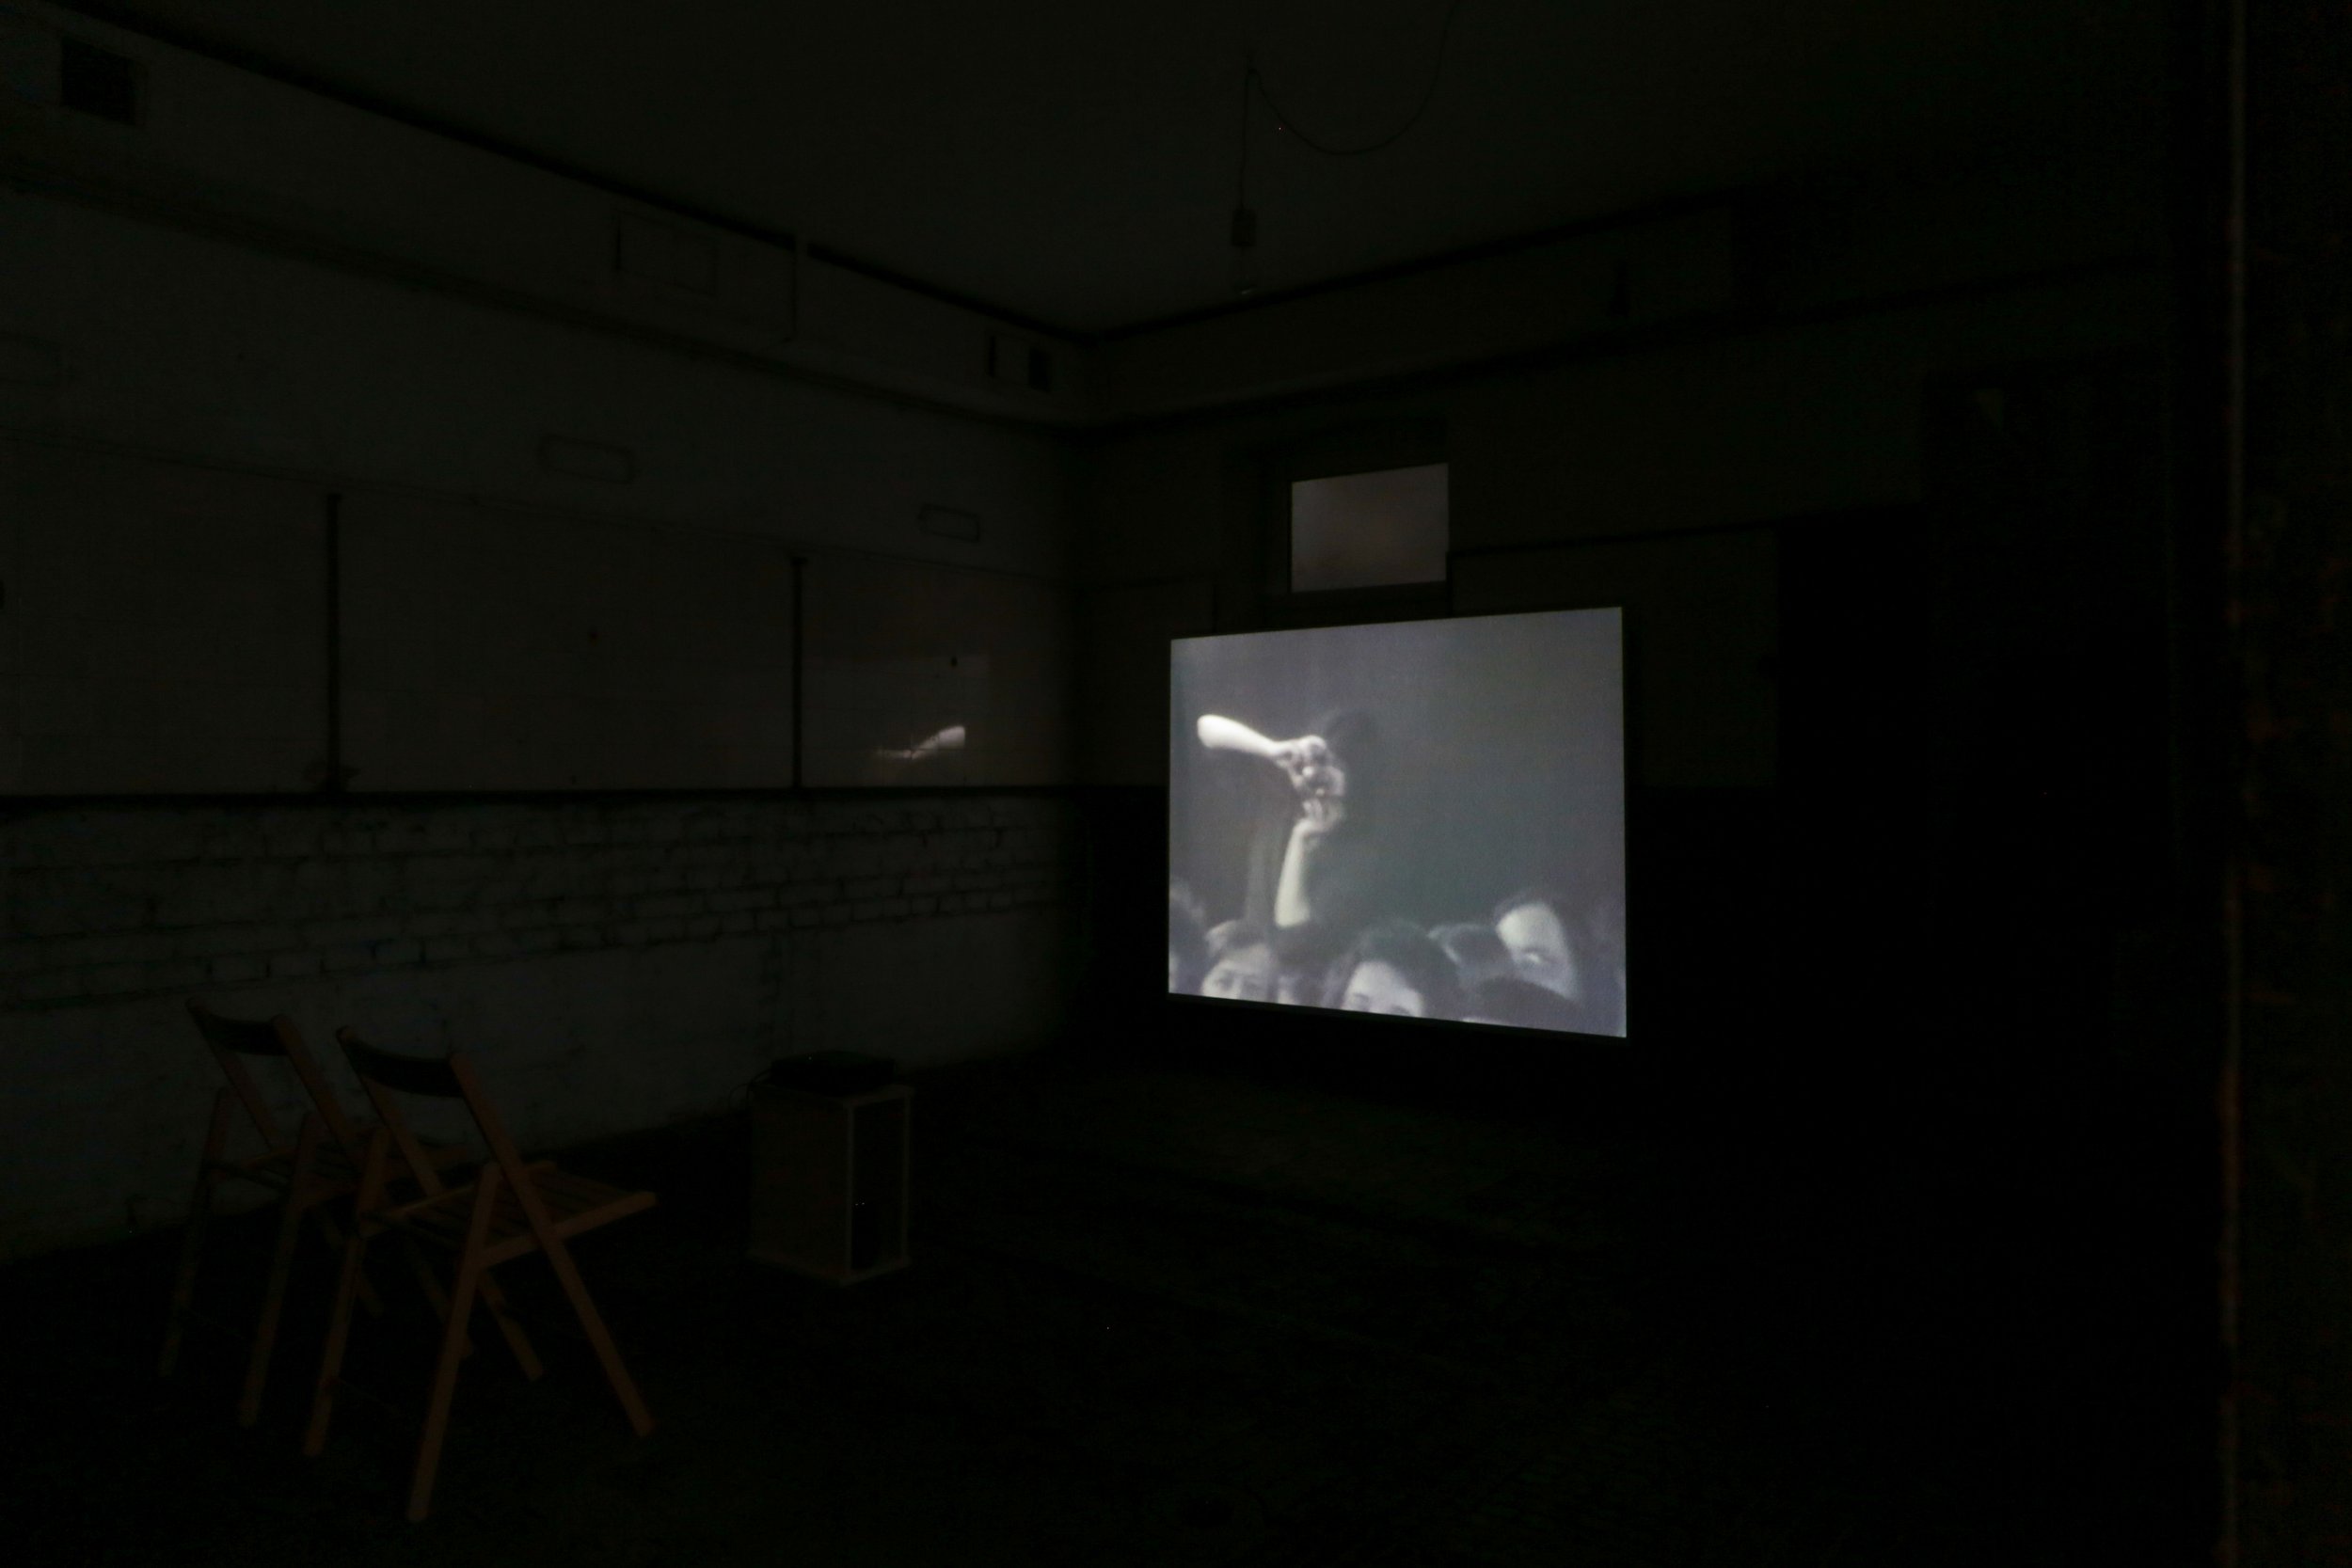   fig2 installation view Dan Graham, Audience/Performer/Mirror, 1977, 00:17:45., In collections: De Appel, LIMA  